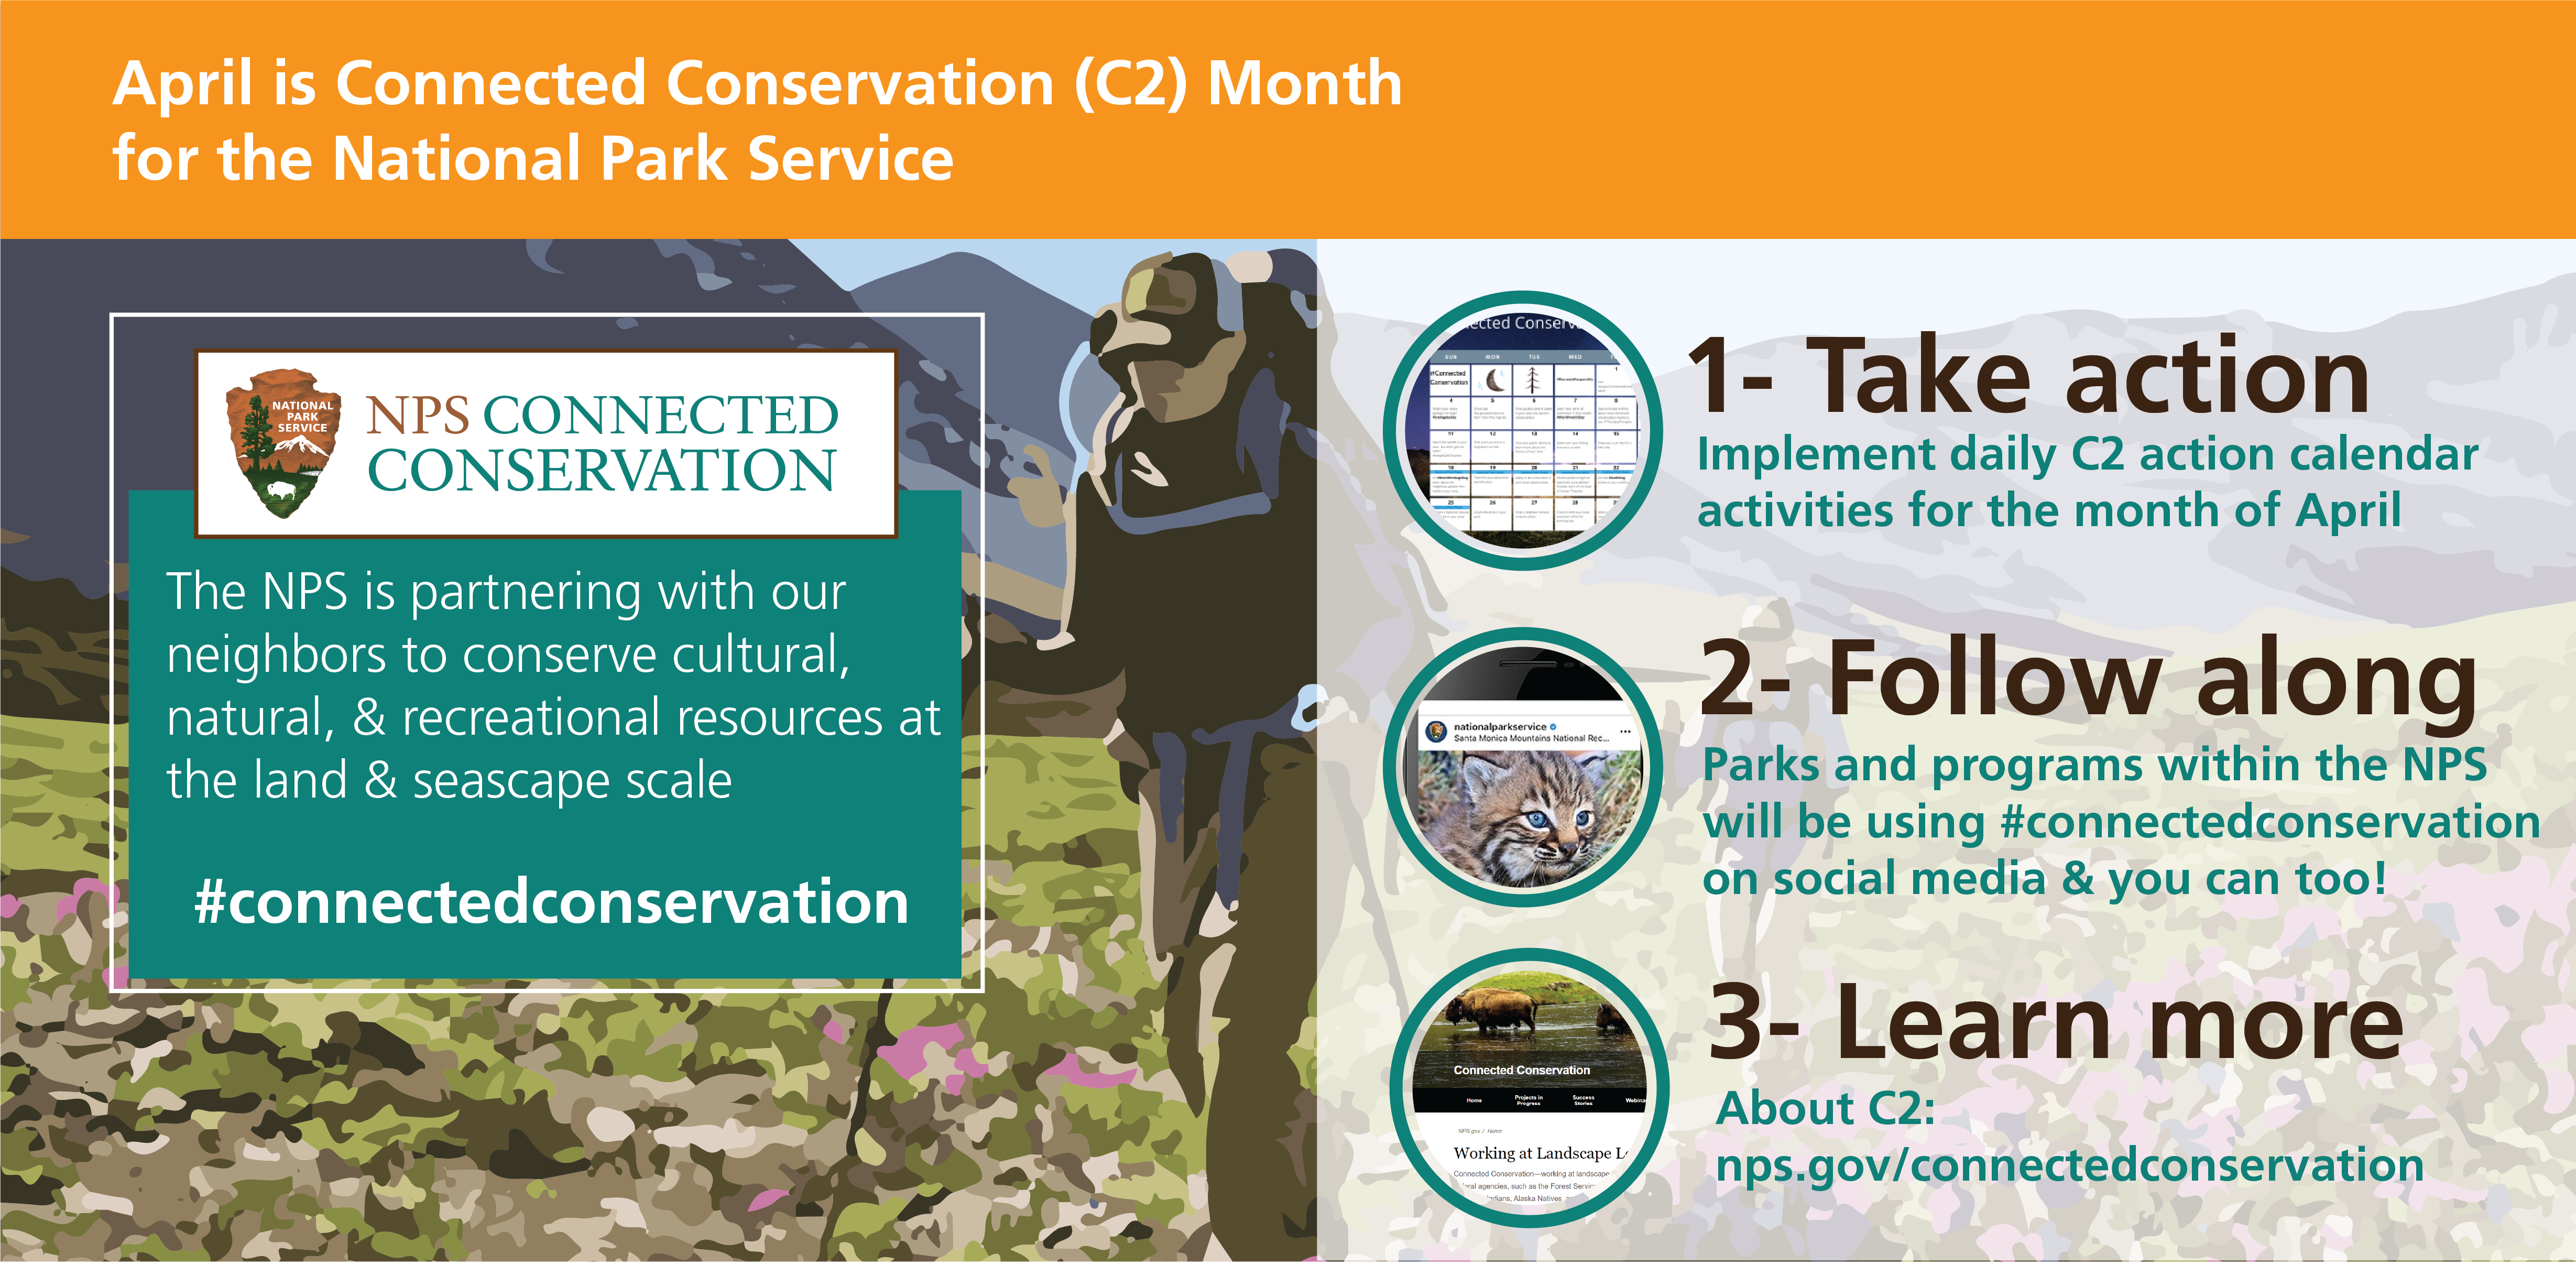 connected conservation logo 1. take action 2. follow along 3. learn more.